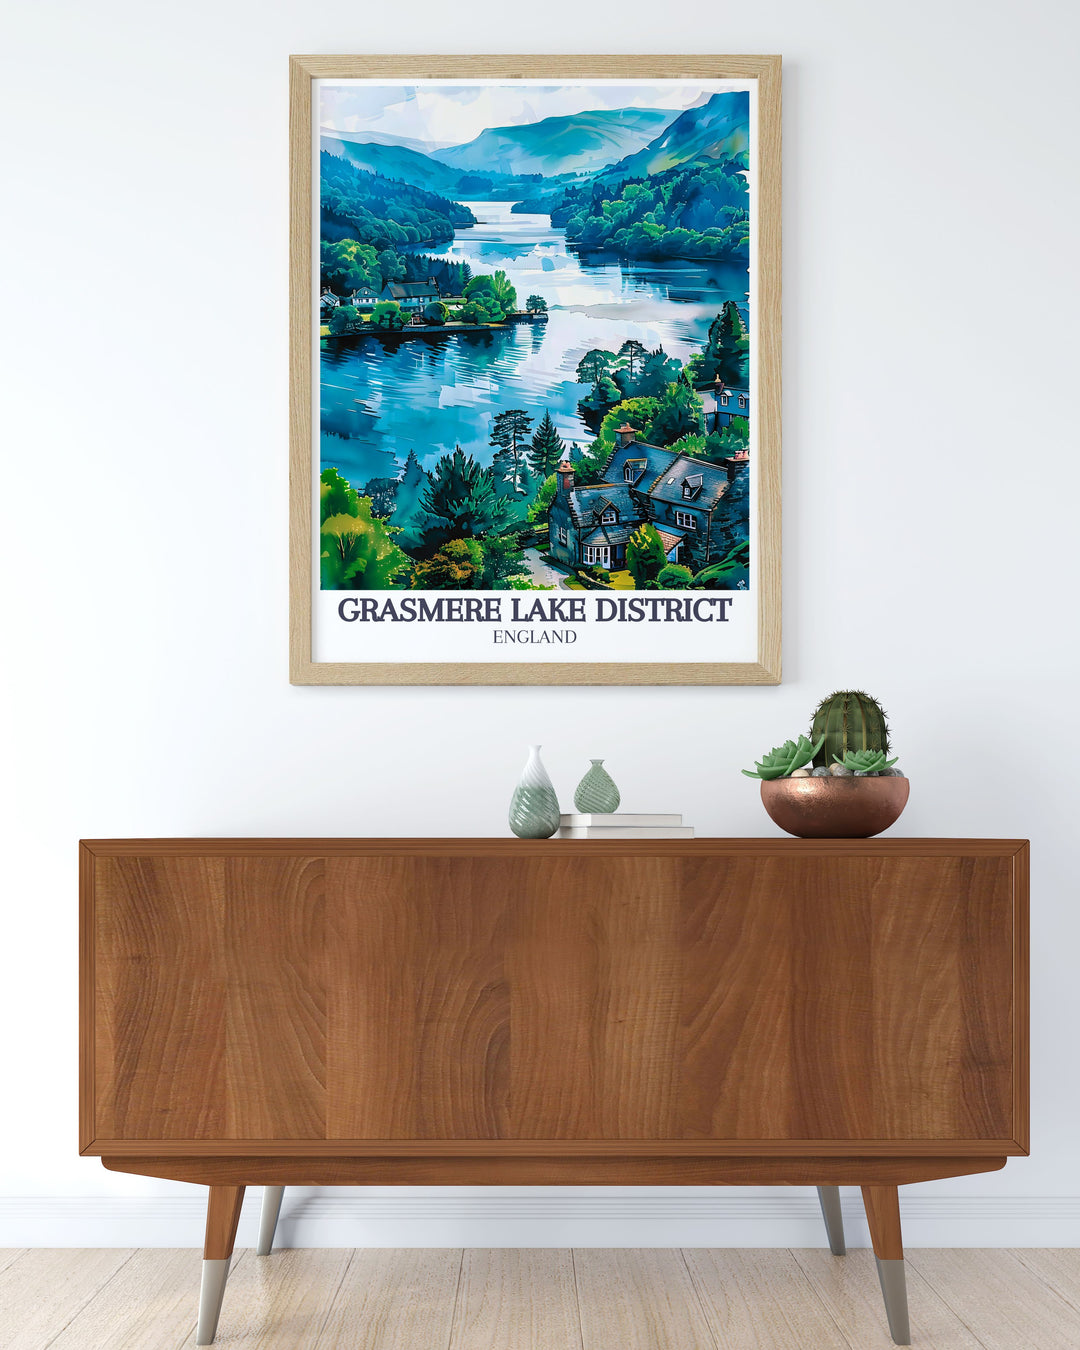 Highlighting the picturesque Grasmere Lake and the quaint village, this poster captures the essence of the Lake District, England, making it a great addition for nature and history lovers.